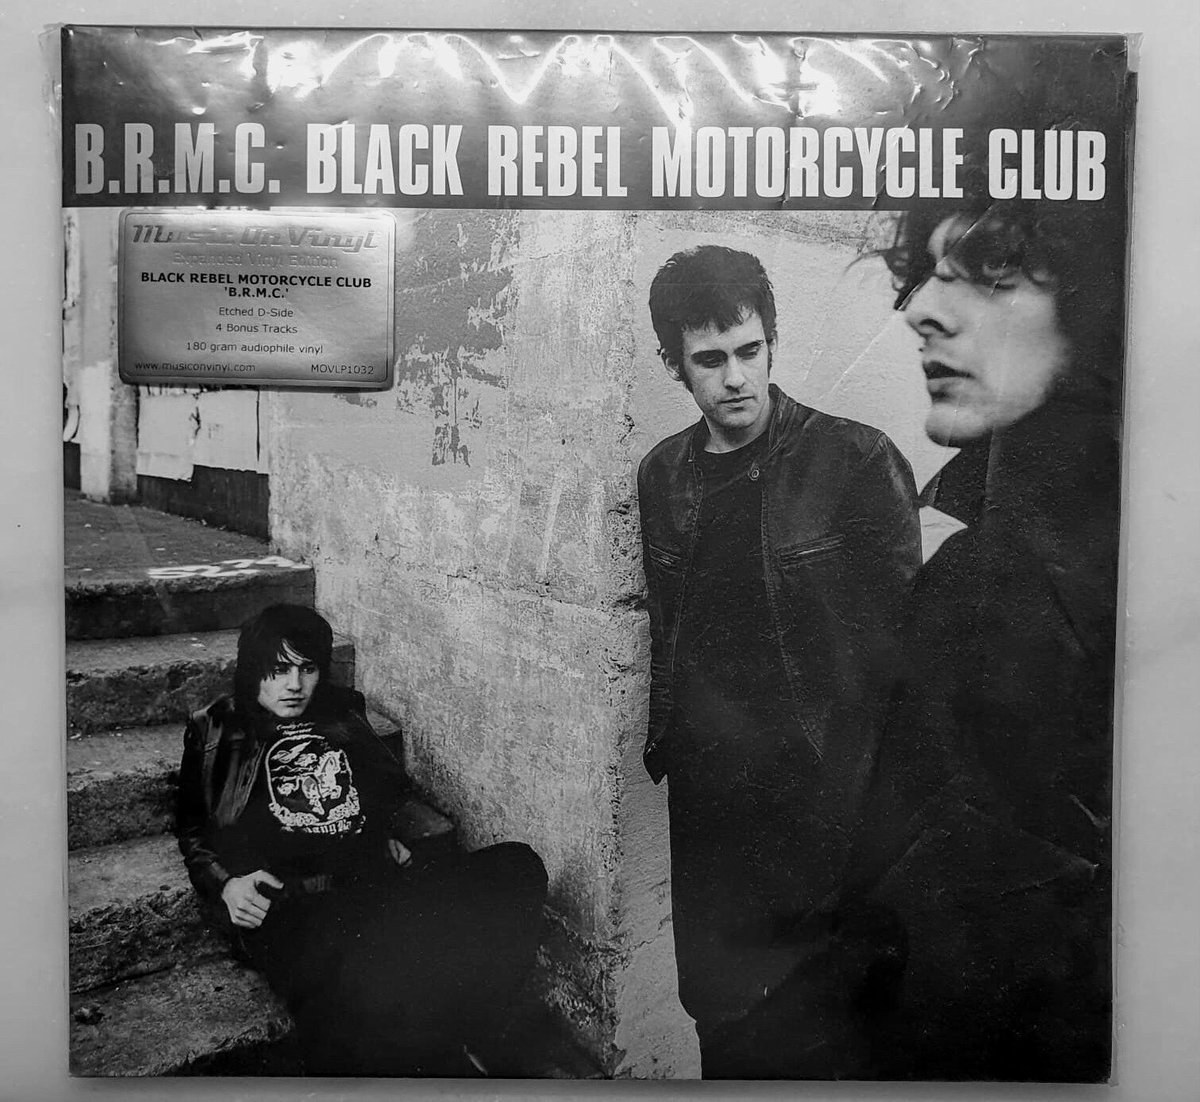 42.Black Rebel Motorcycle ClubBRMCThis debut album & band changed everything for me growing up. No bigger compliment than that. The entire album is just one big time machine, revisiting great memories  #AtoZMusicChallenge #AtoZMusicCollection